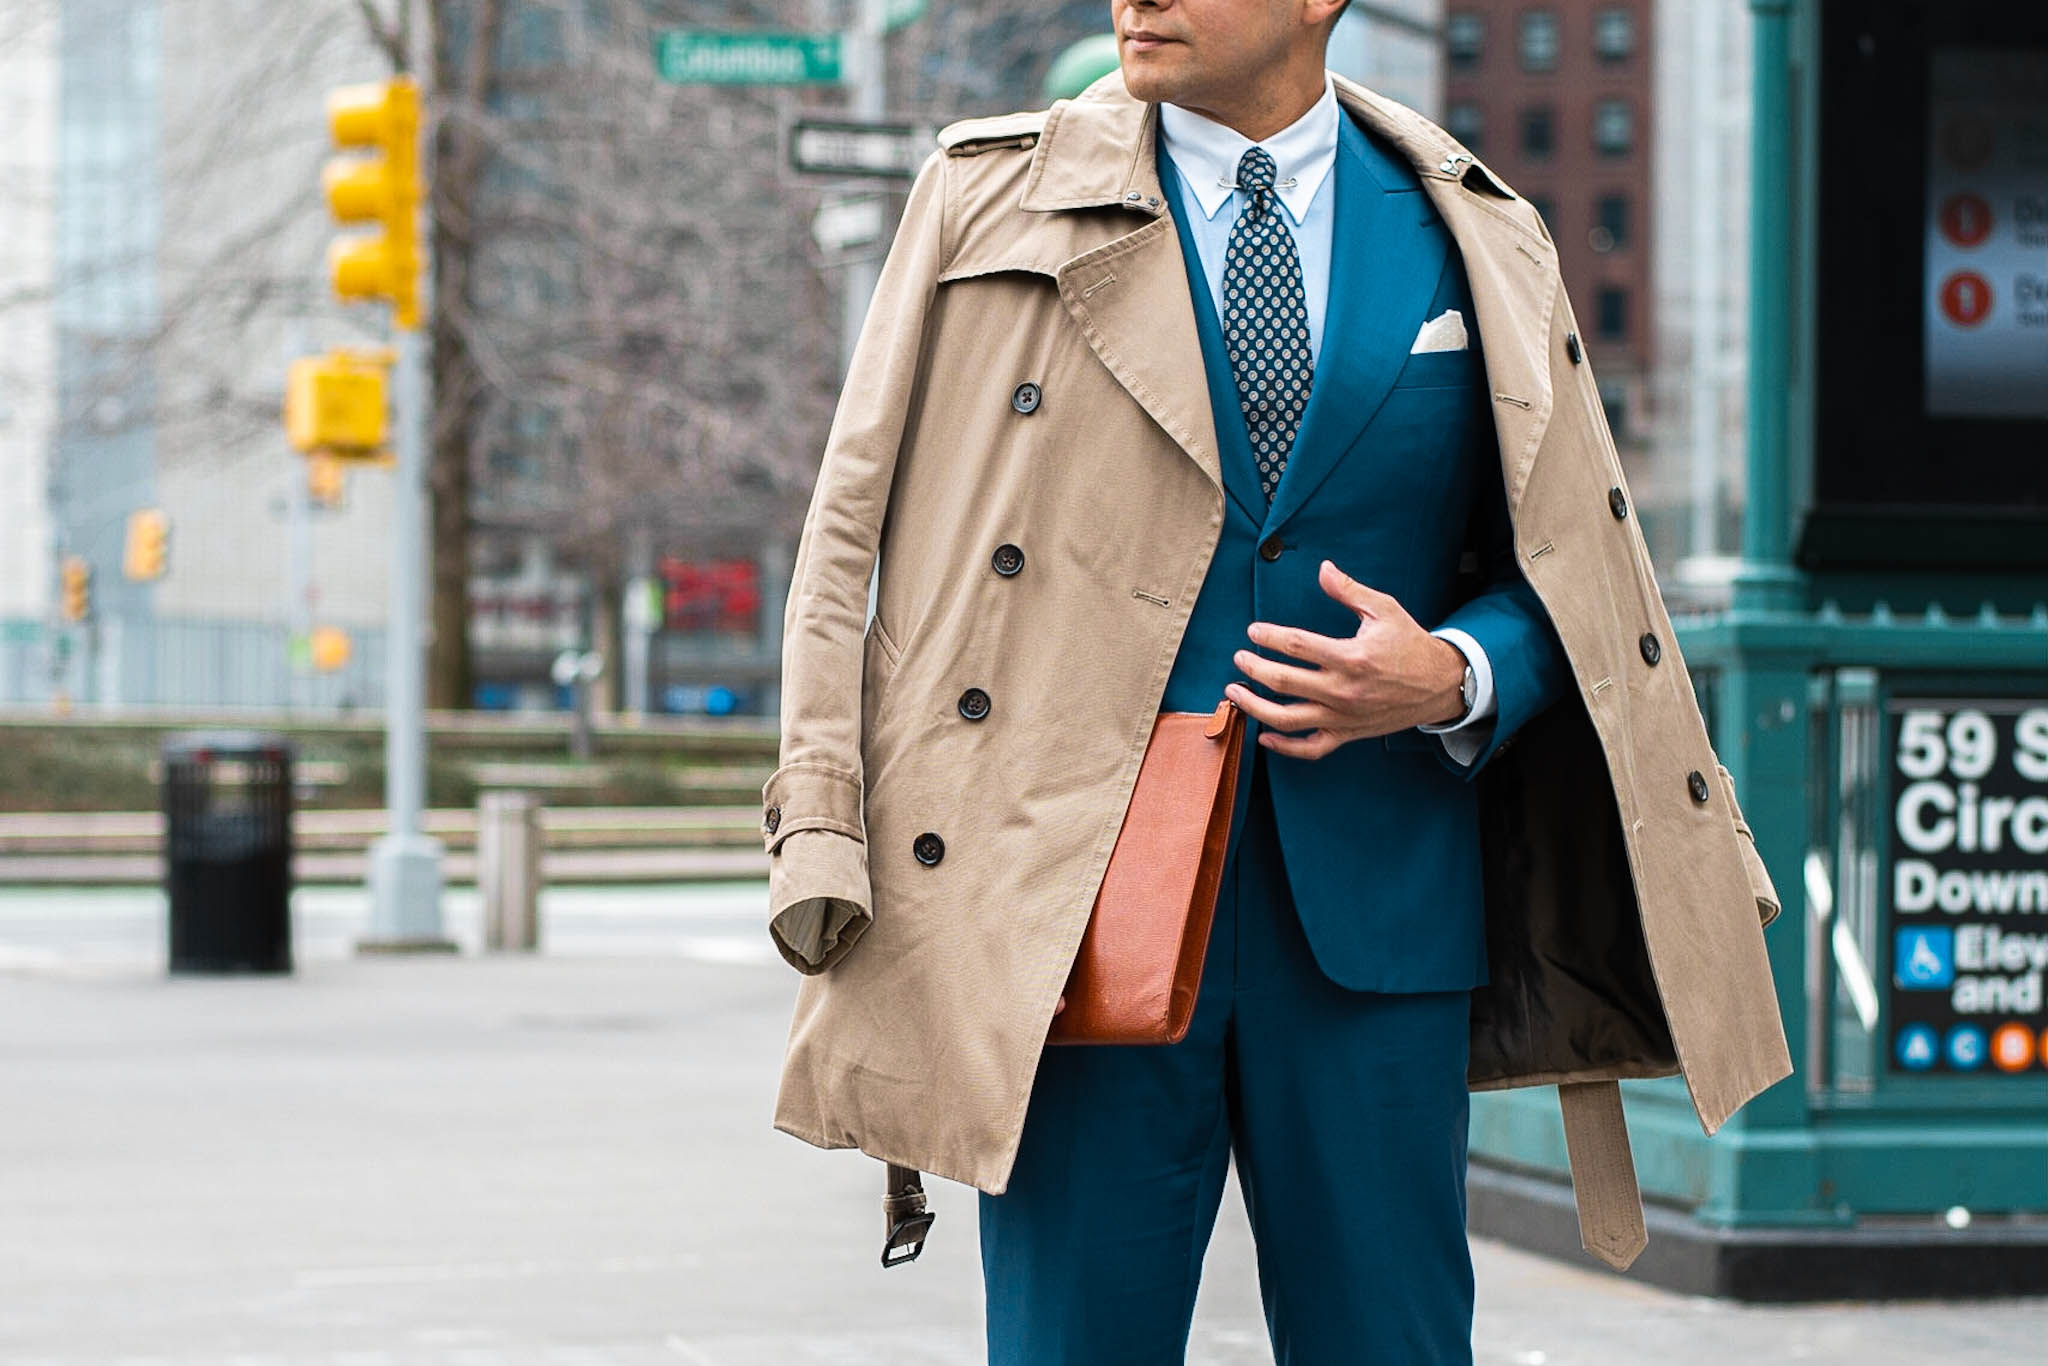 WHAT CAN YOU DO TO BETTER PULL OFF A SUIT?